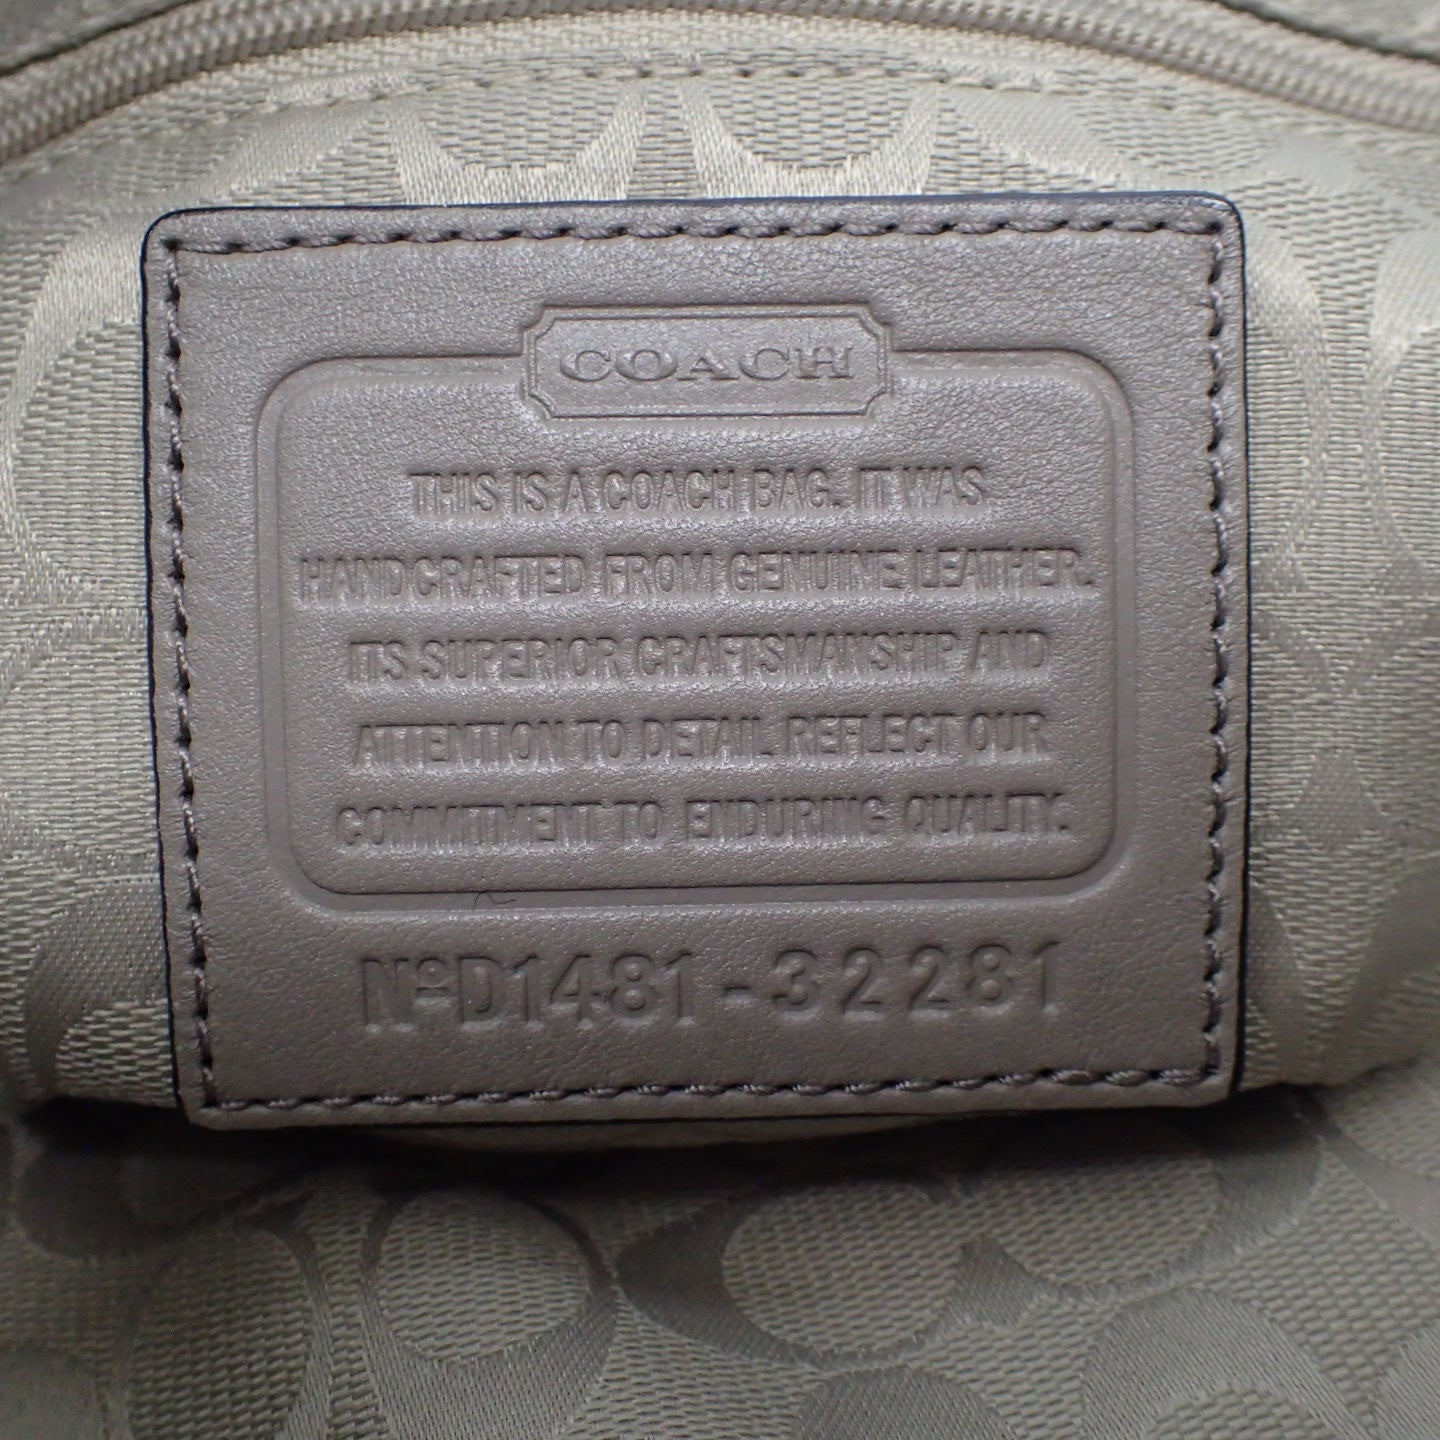 Coach shoulder bag bucket leather with leather tag 32281 Gray COACH [AFE2] [Used] 